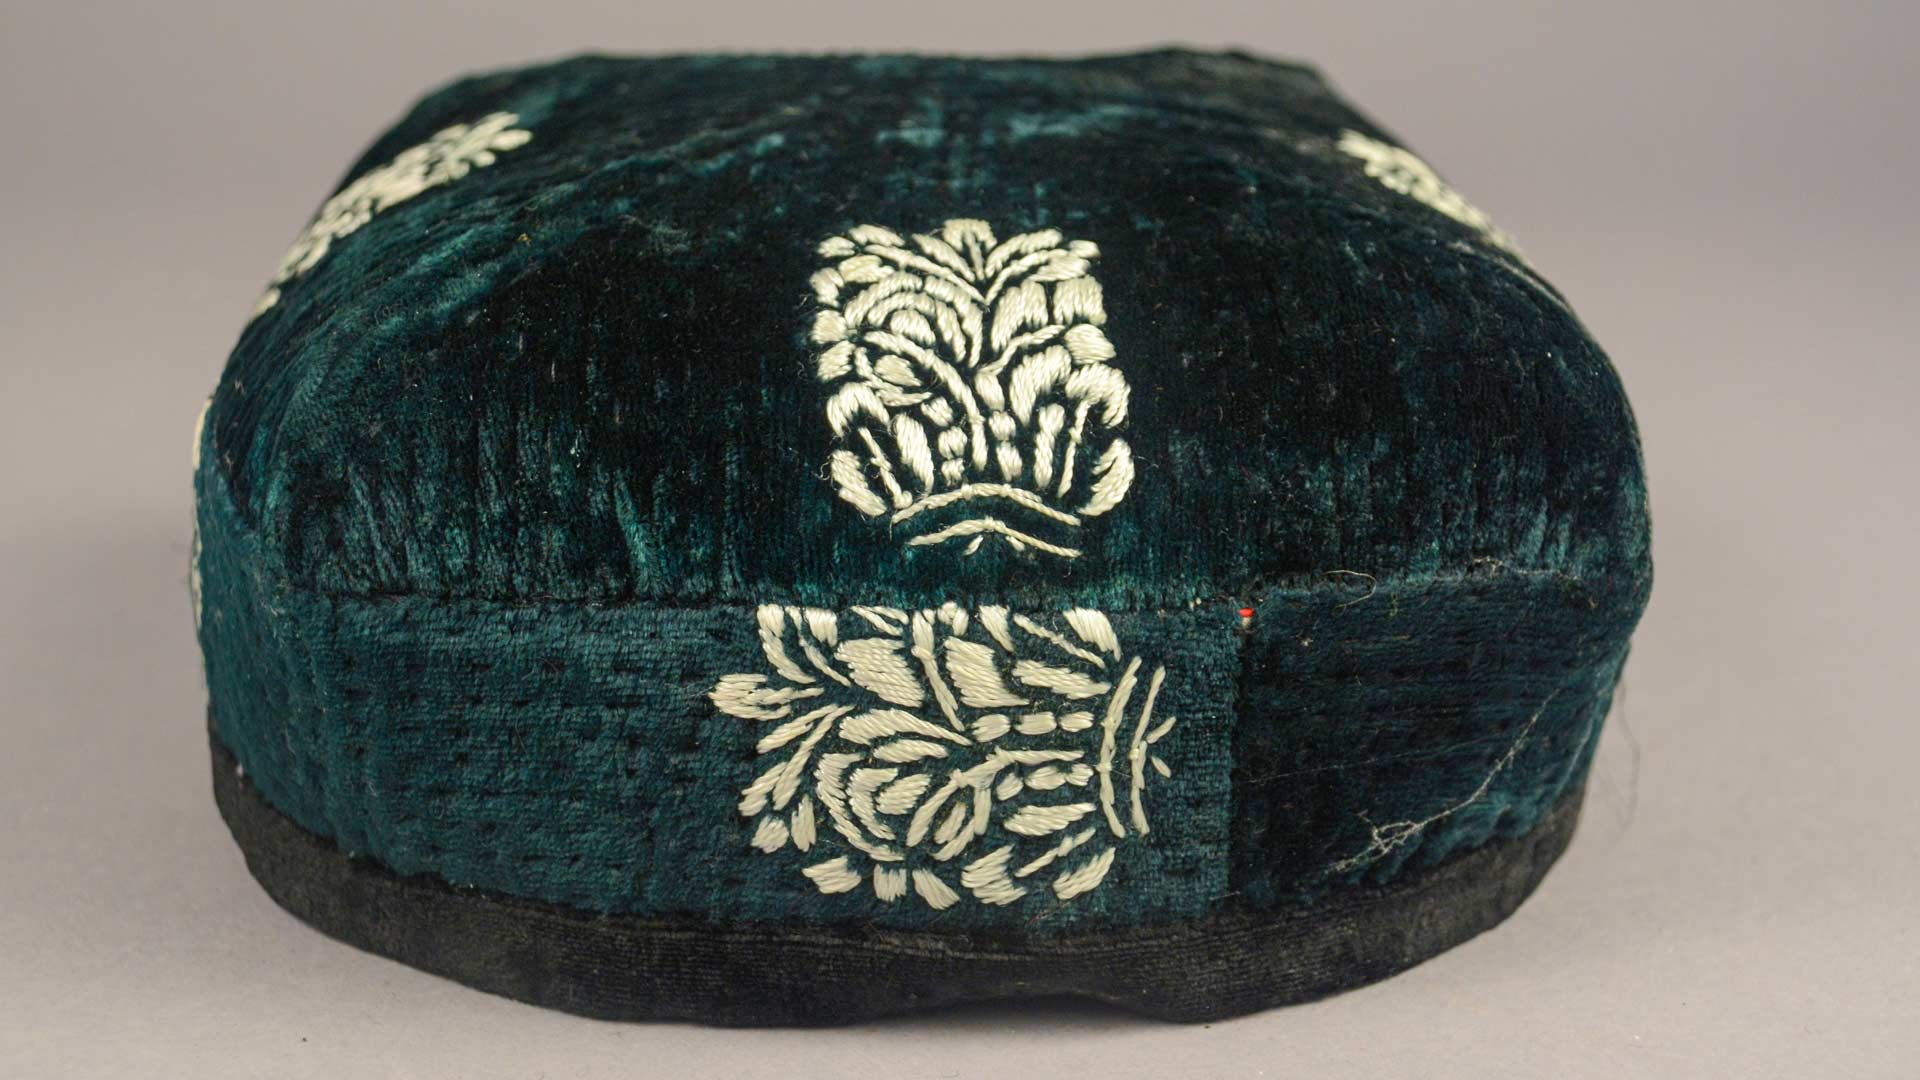 green velvet hat with white embroidery